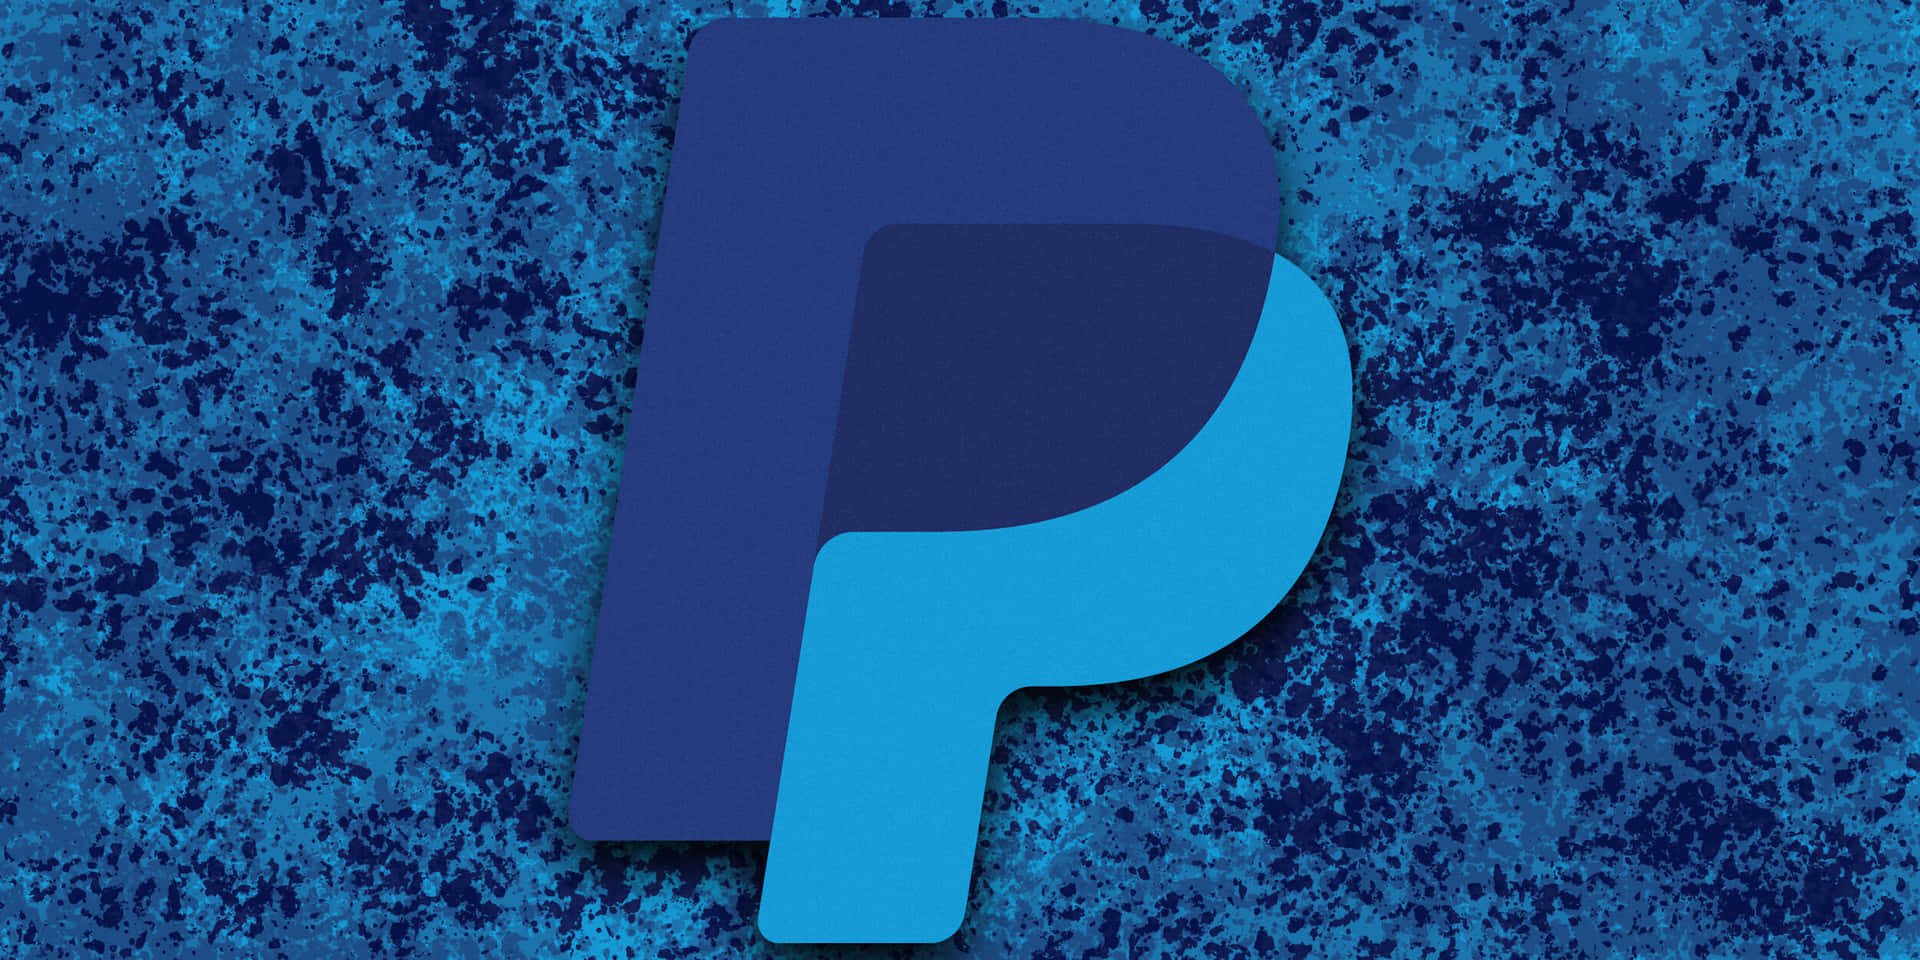 Paypal Background Wallpaper